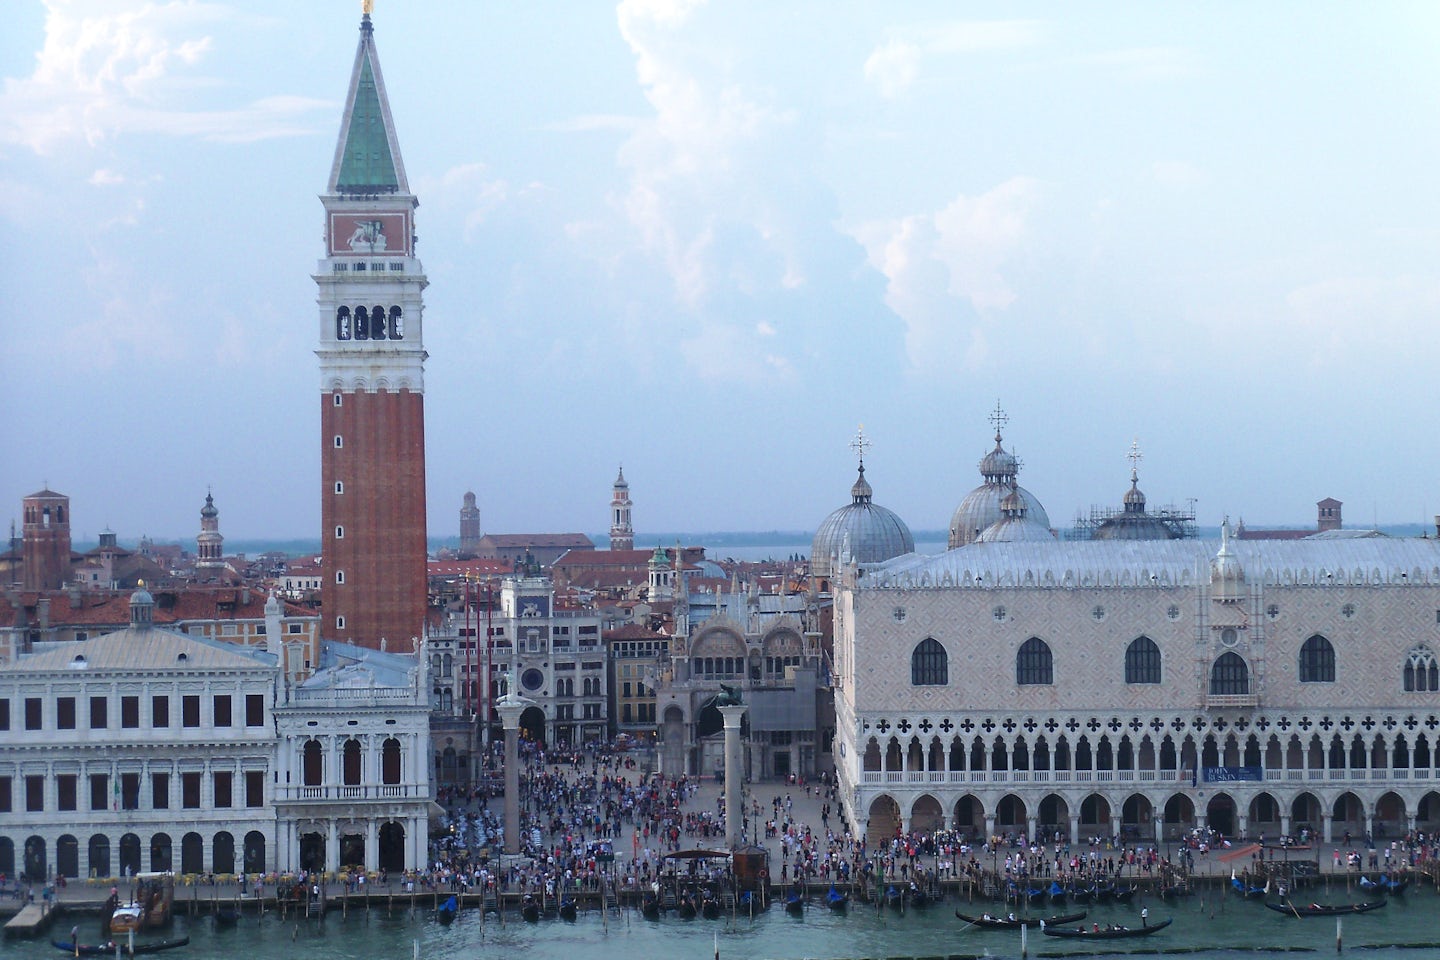 St Mark's Square and the Doge Palace in Venice.